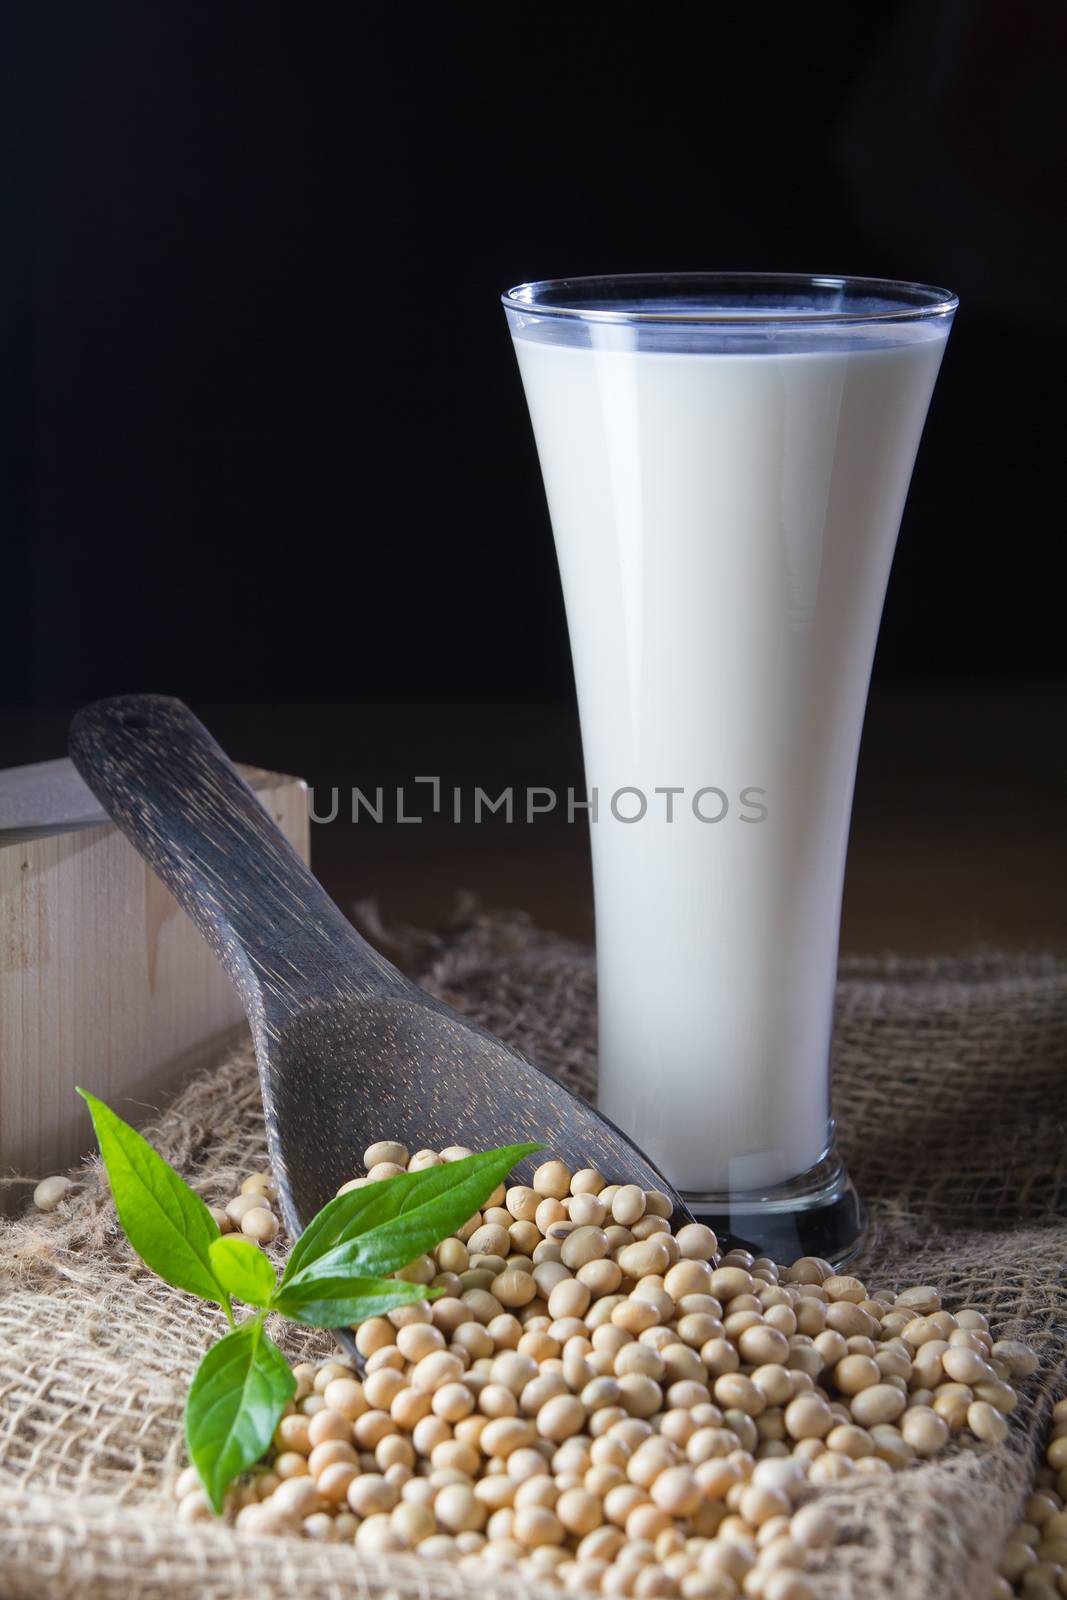 soy milk by tehcheesiong